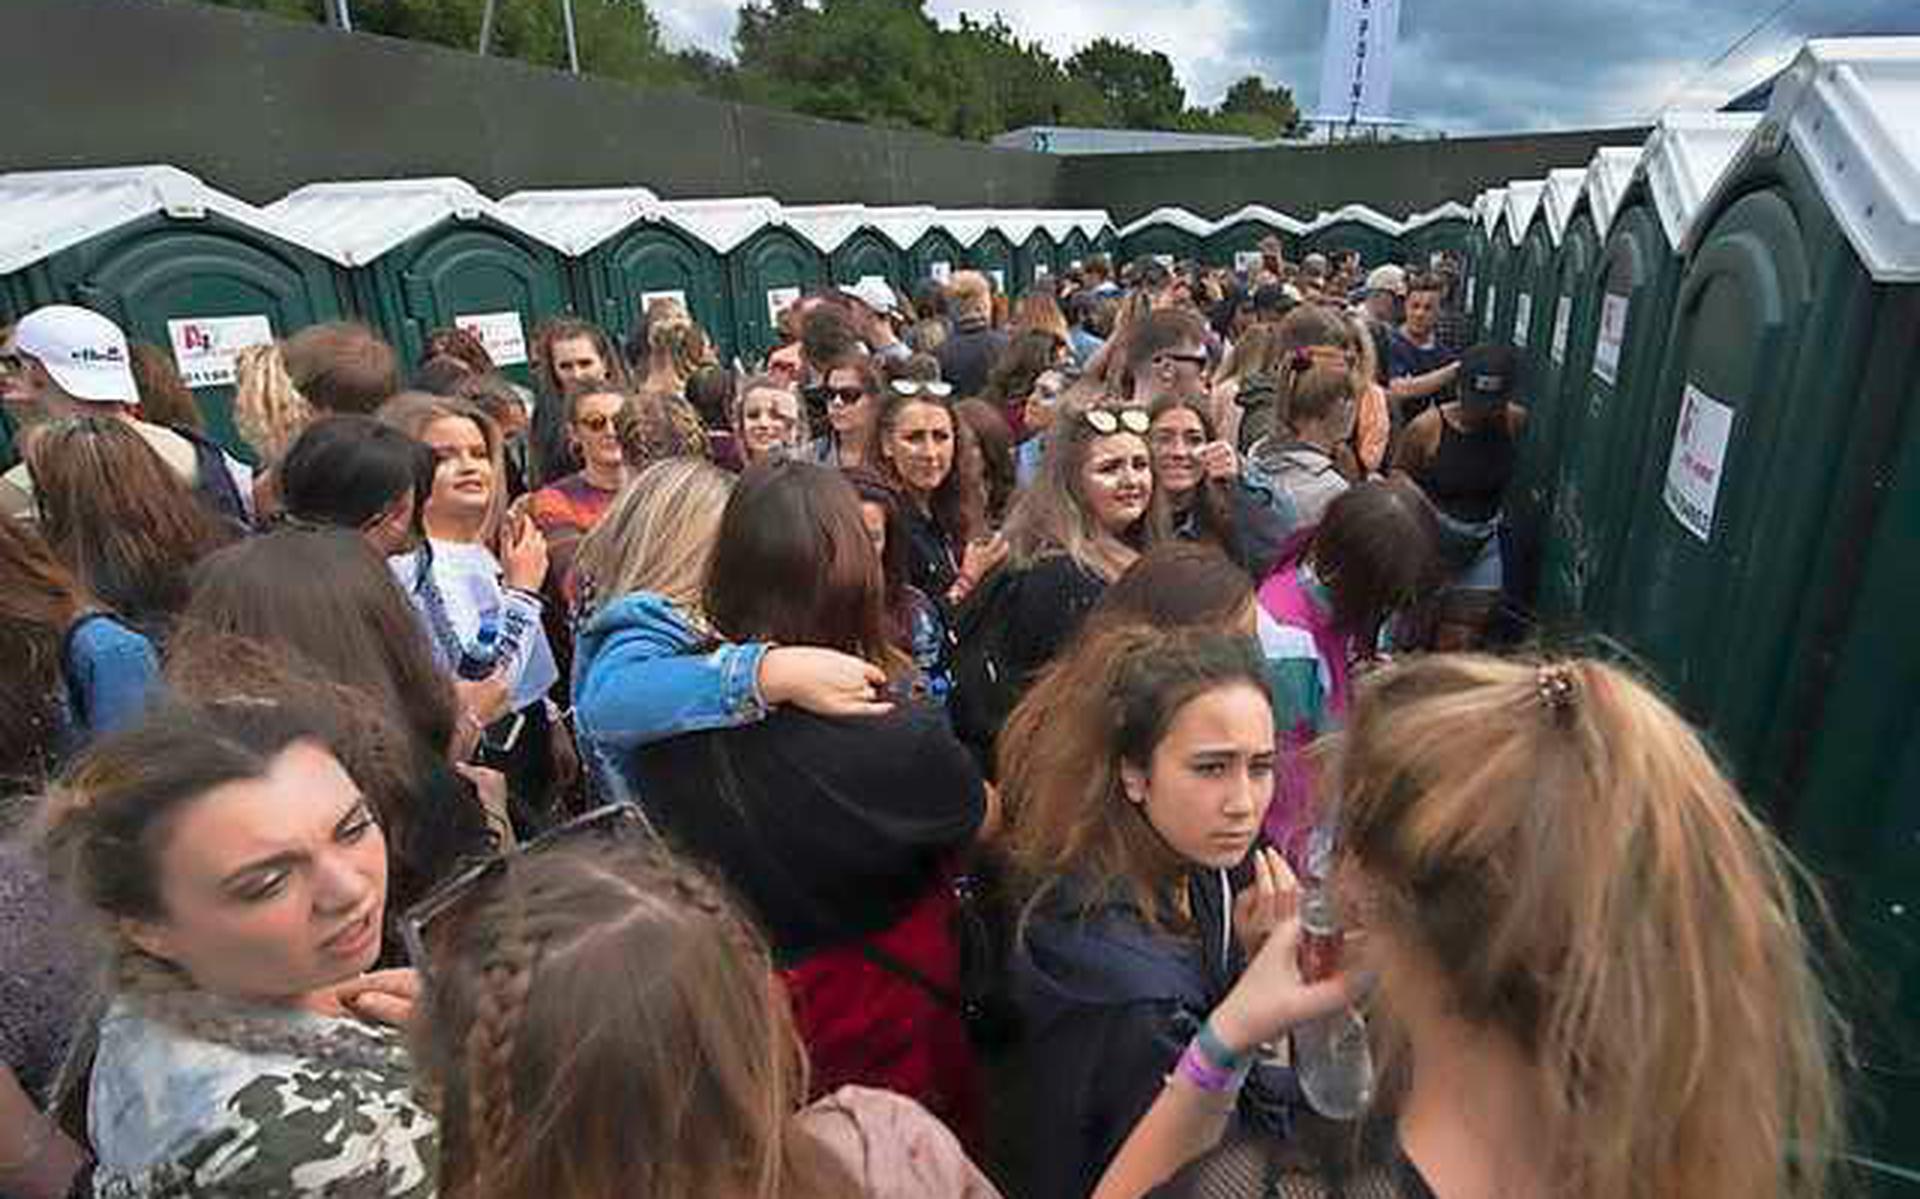 The professor comes up with a simple solution to the long queues in front of women's toilets at festivals